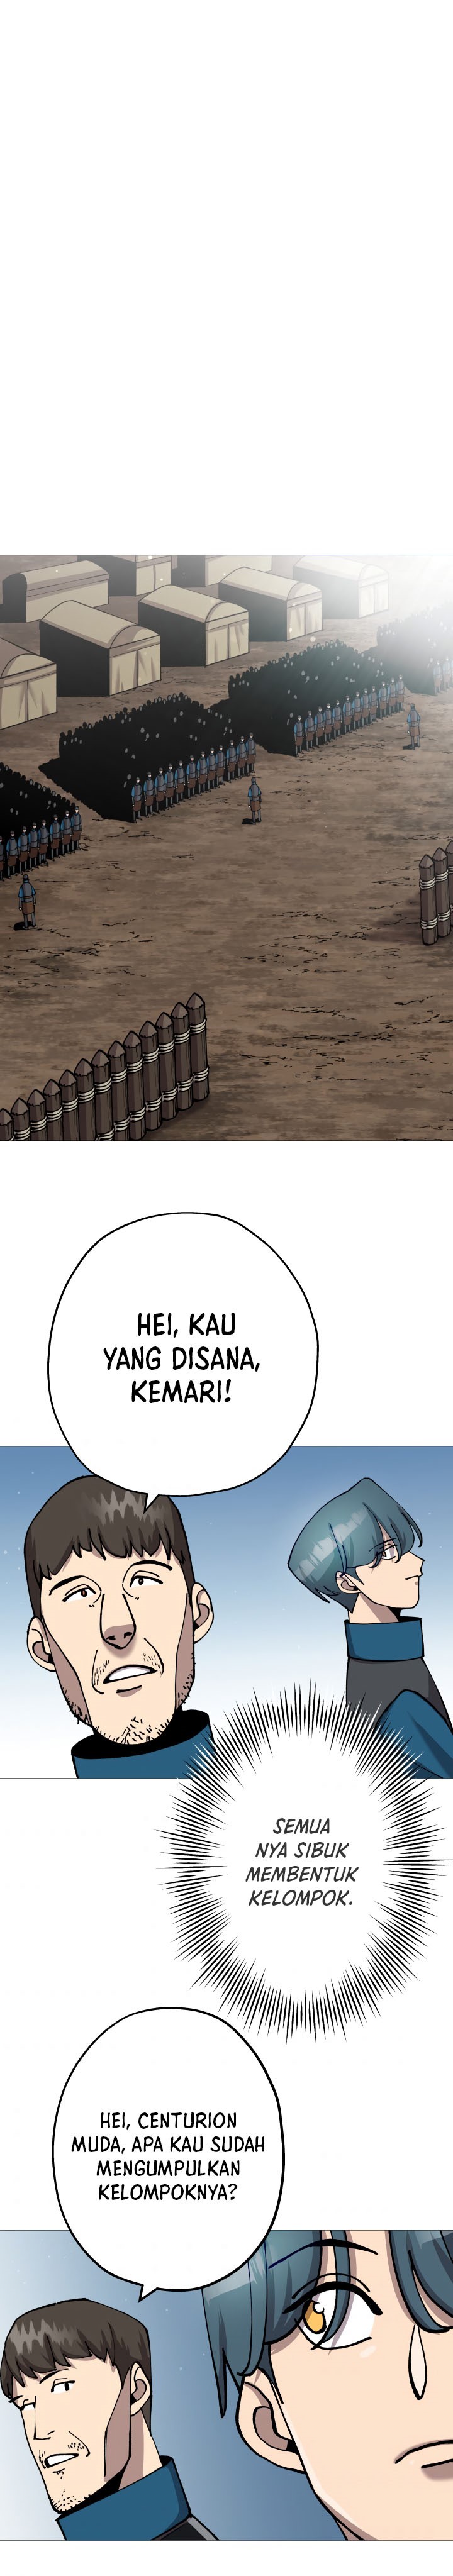 Dilarang COPAS - situs resmi www.mangacanblog.com - Komik the story of a low rank soldier becoming a monarch 018 - chapter 18 19 Indonesia the story of a low rank soldier becoming a monarch 018 - chapter 18 Terbaru 29|Baca Manga Komik Indonesia|Mangacan